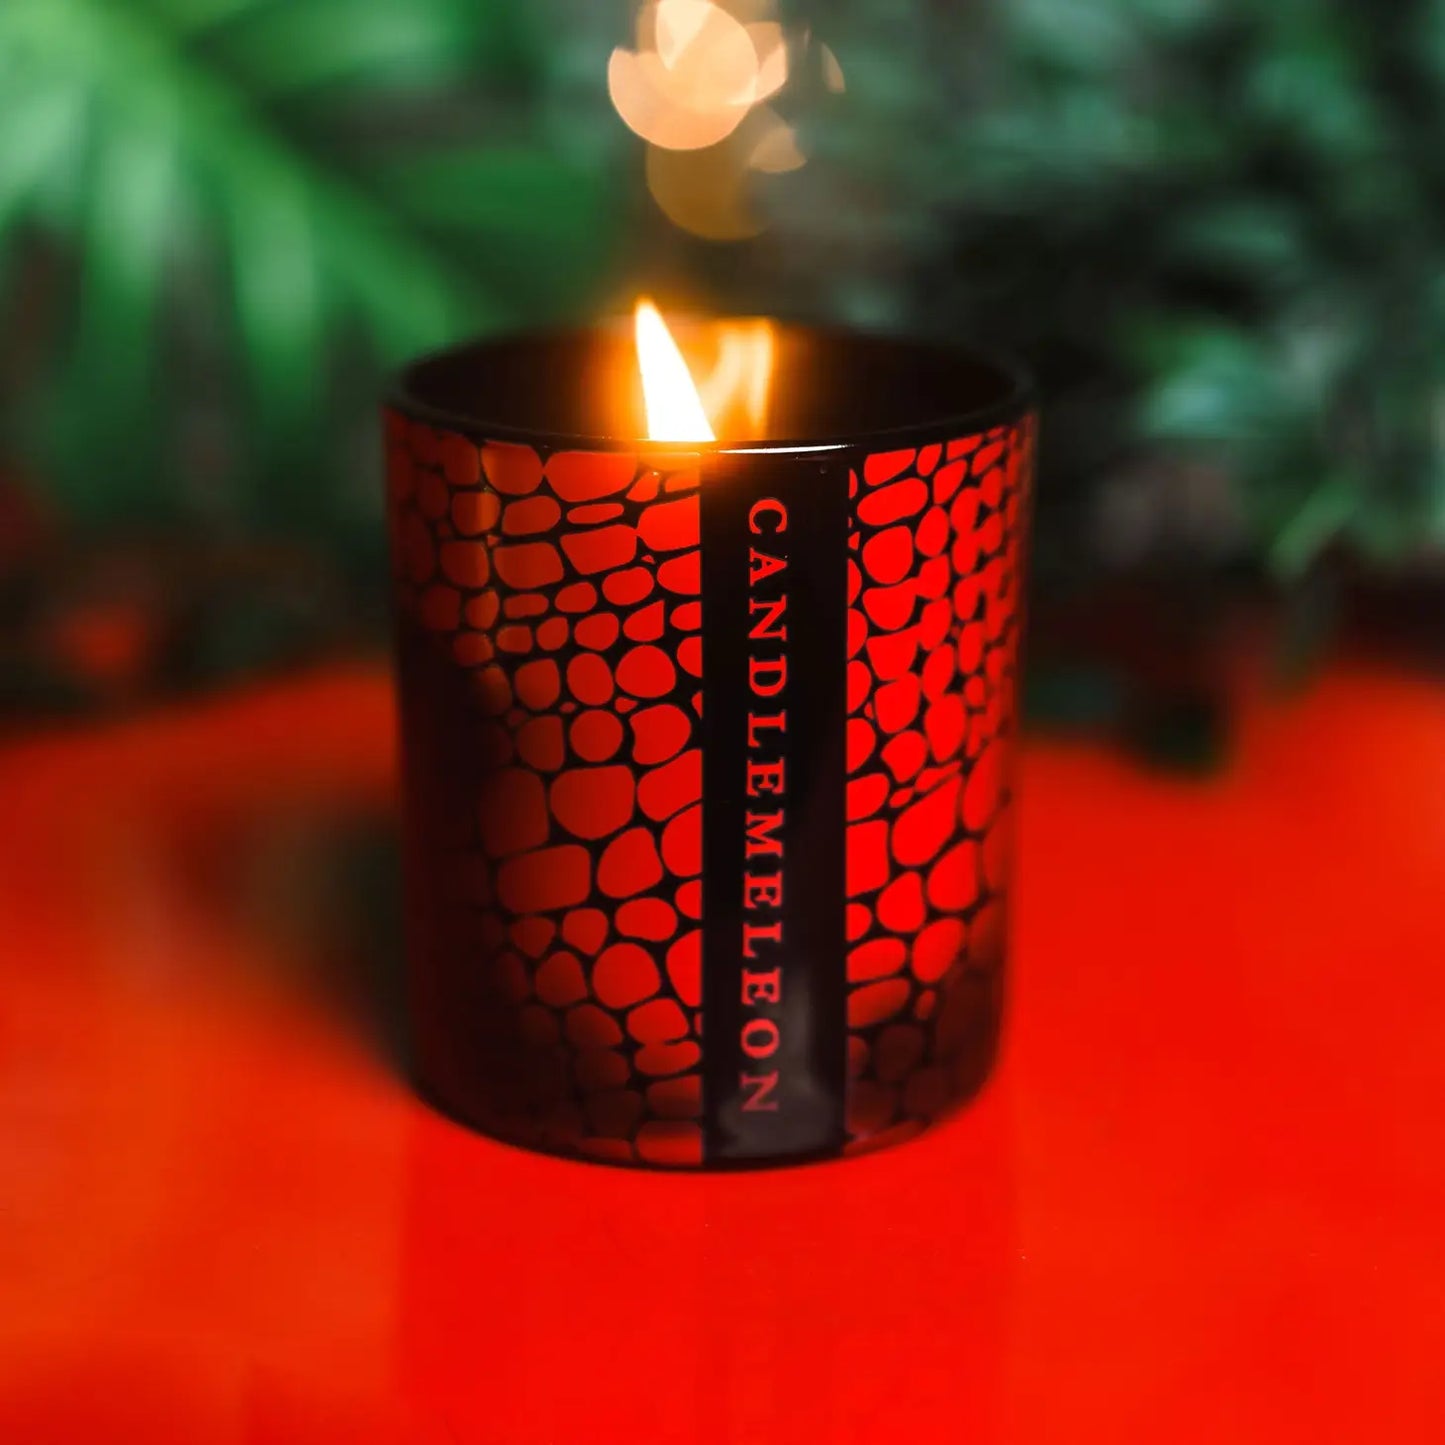 Candlemeleon Red Snake Woodenwick Soy Wax Candle at Joetie Home Fragrance. Luxury Handmade Apothecary Soy Candles